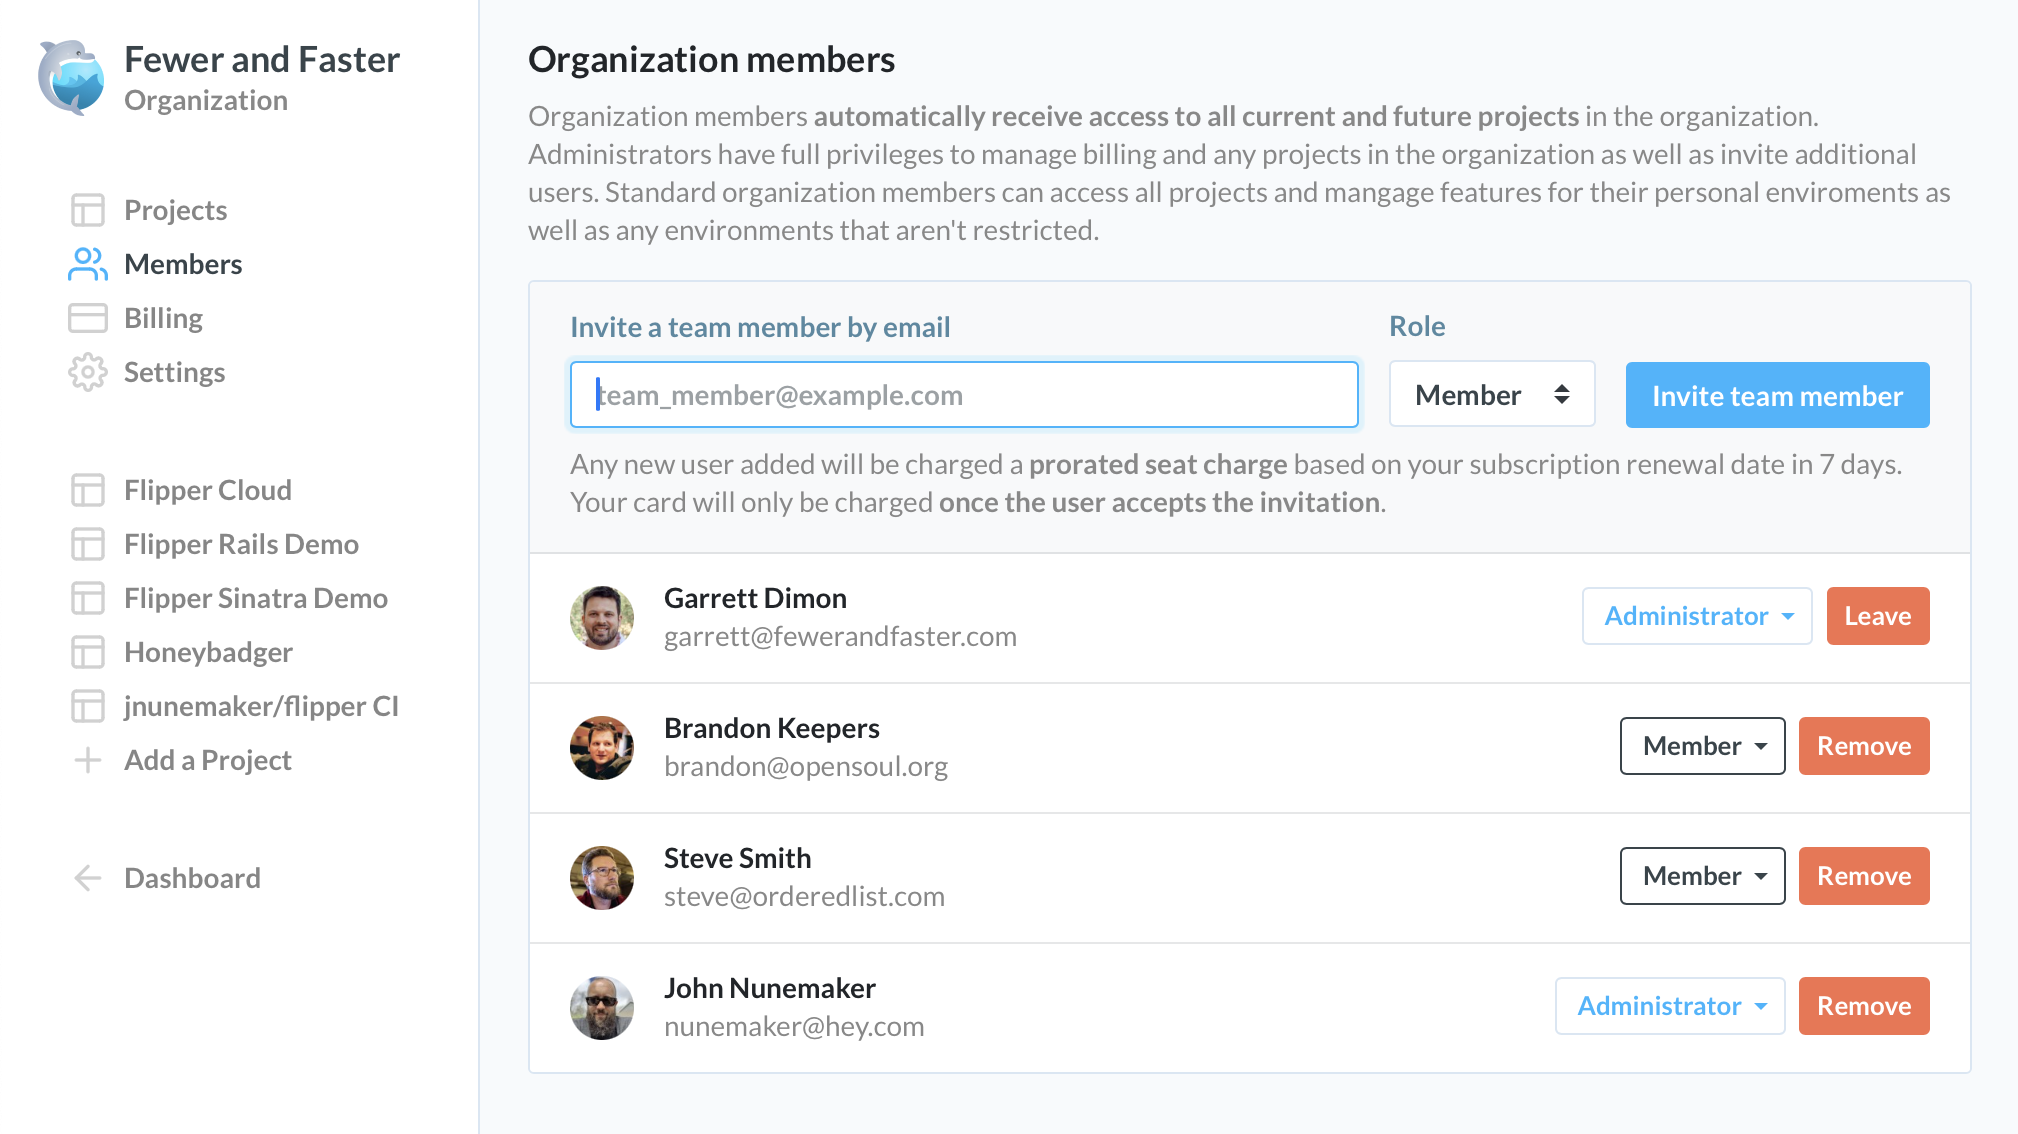 A screenshot of the organization members page with an invitation form at the top with an option to select the role.